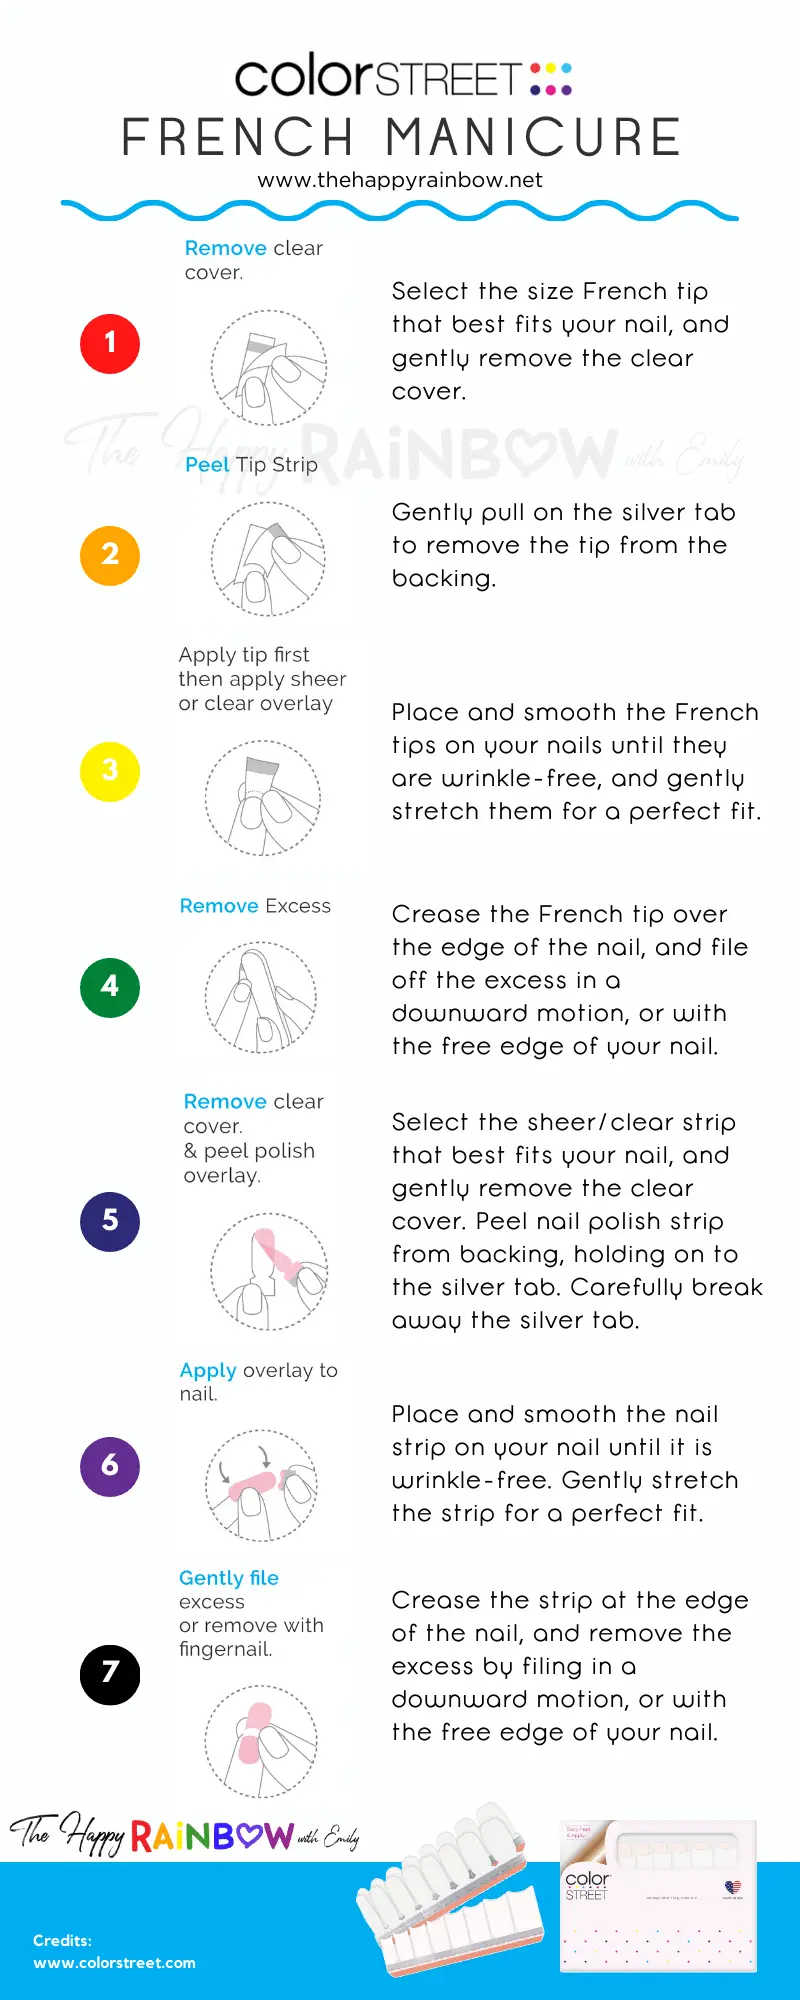 Infographic showing how to apply french tip Color Street step by step